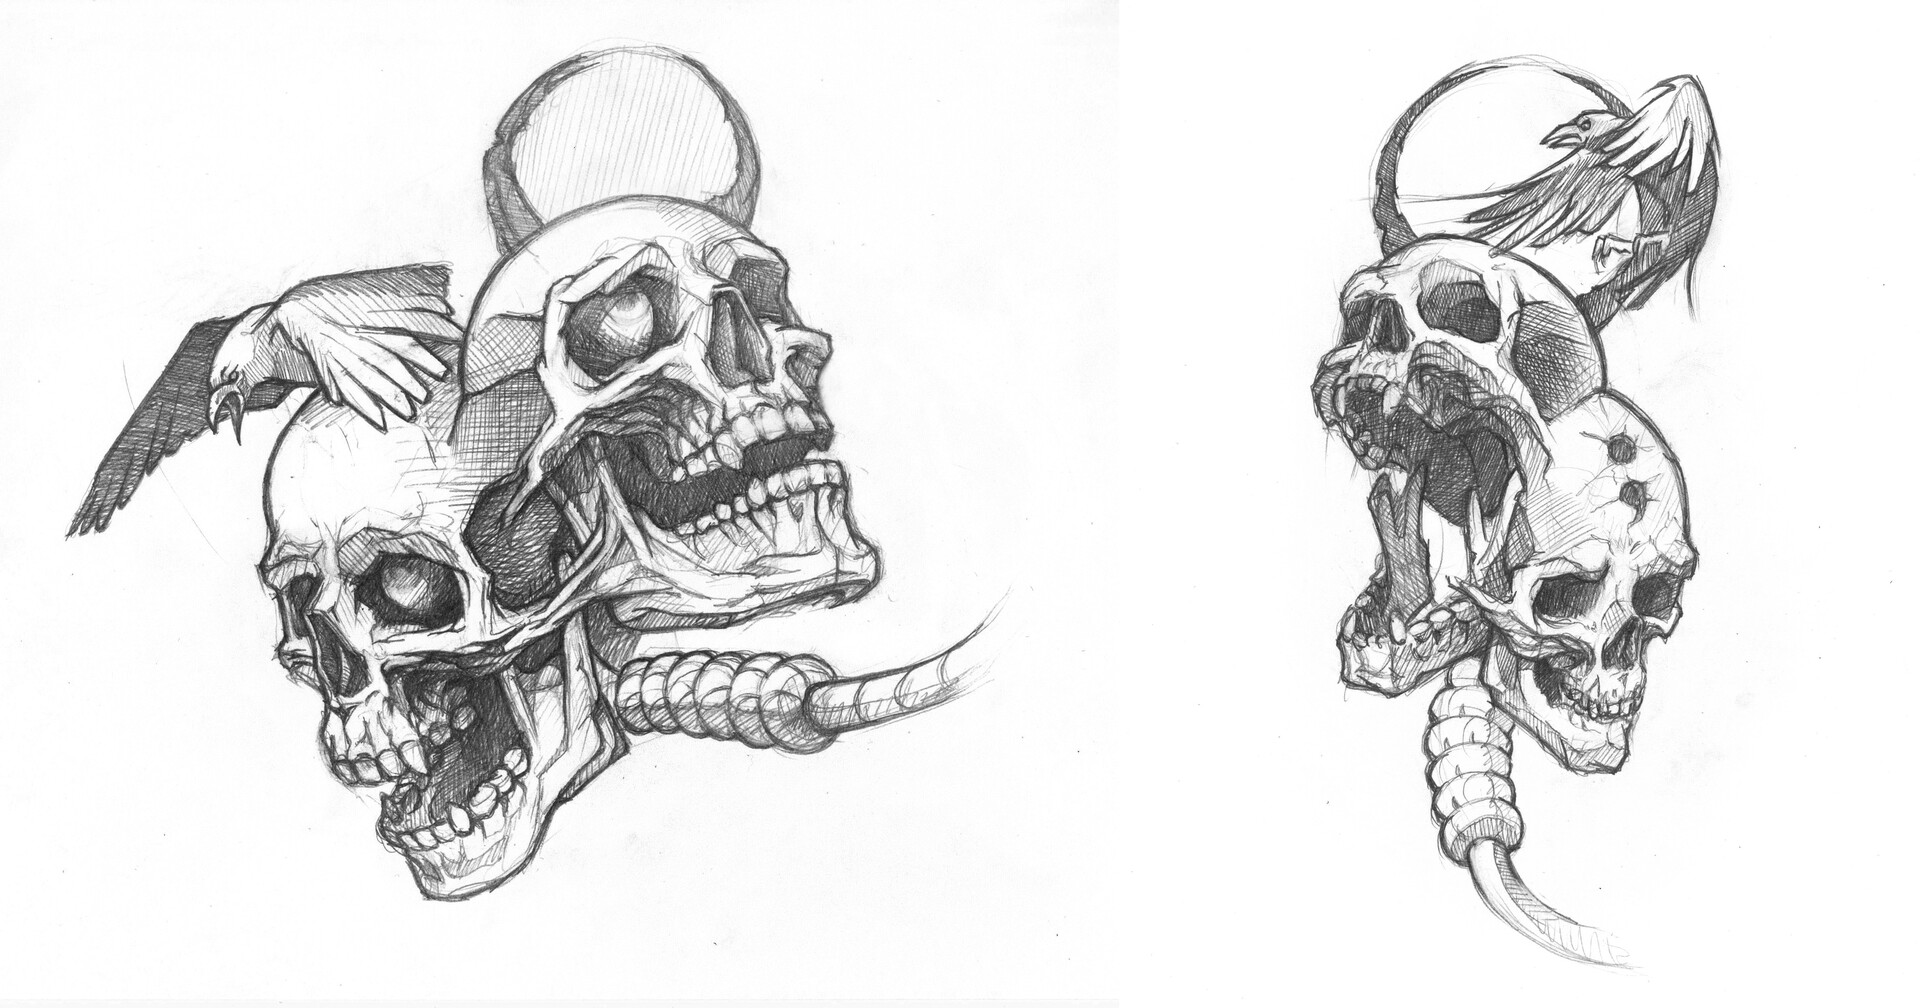 Acanthus, Roses And Skull Sketch The Order - The Order Custom Tattoos